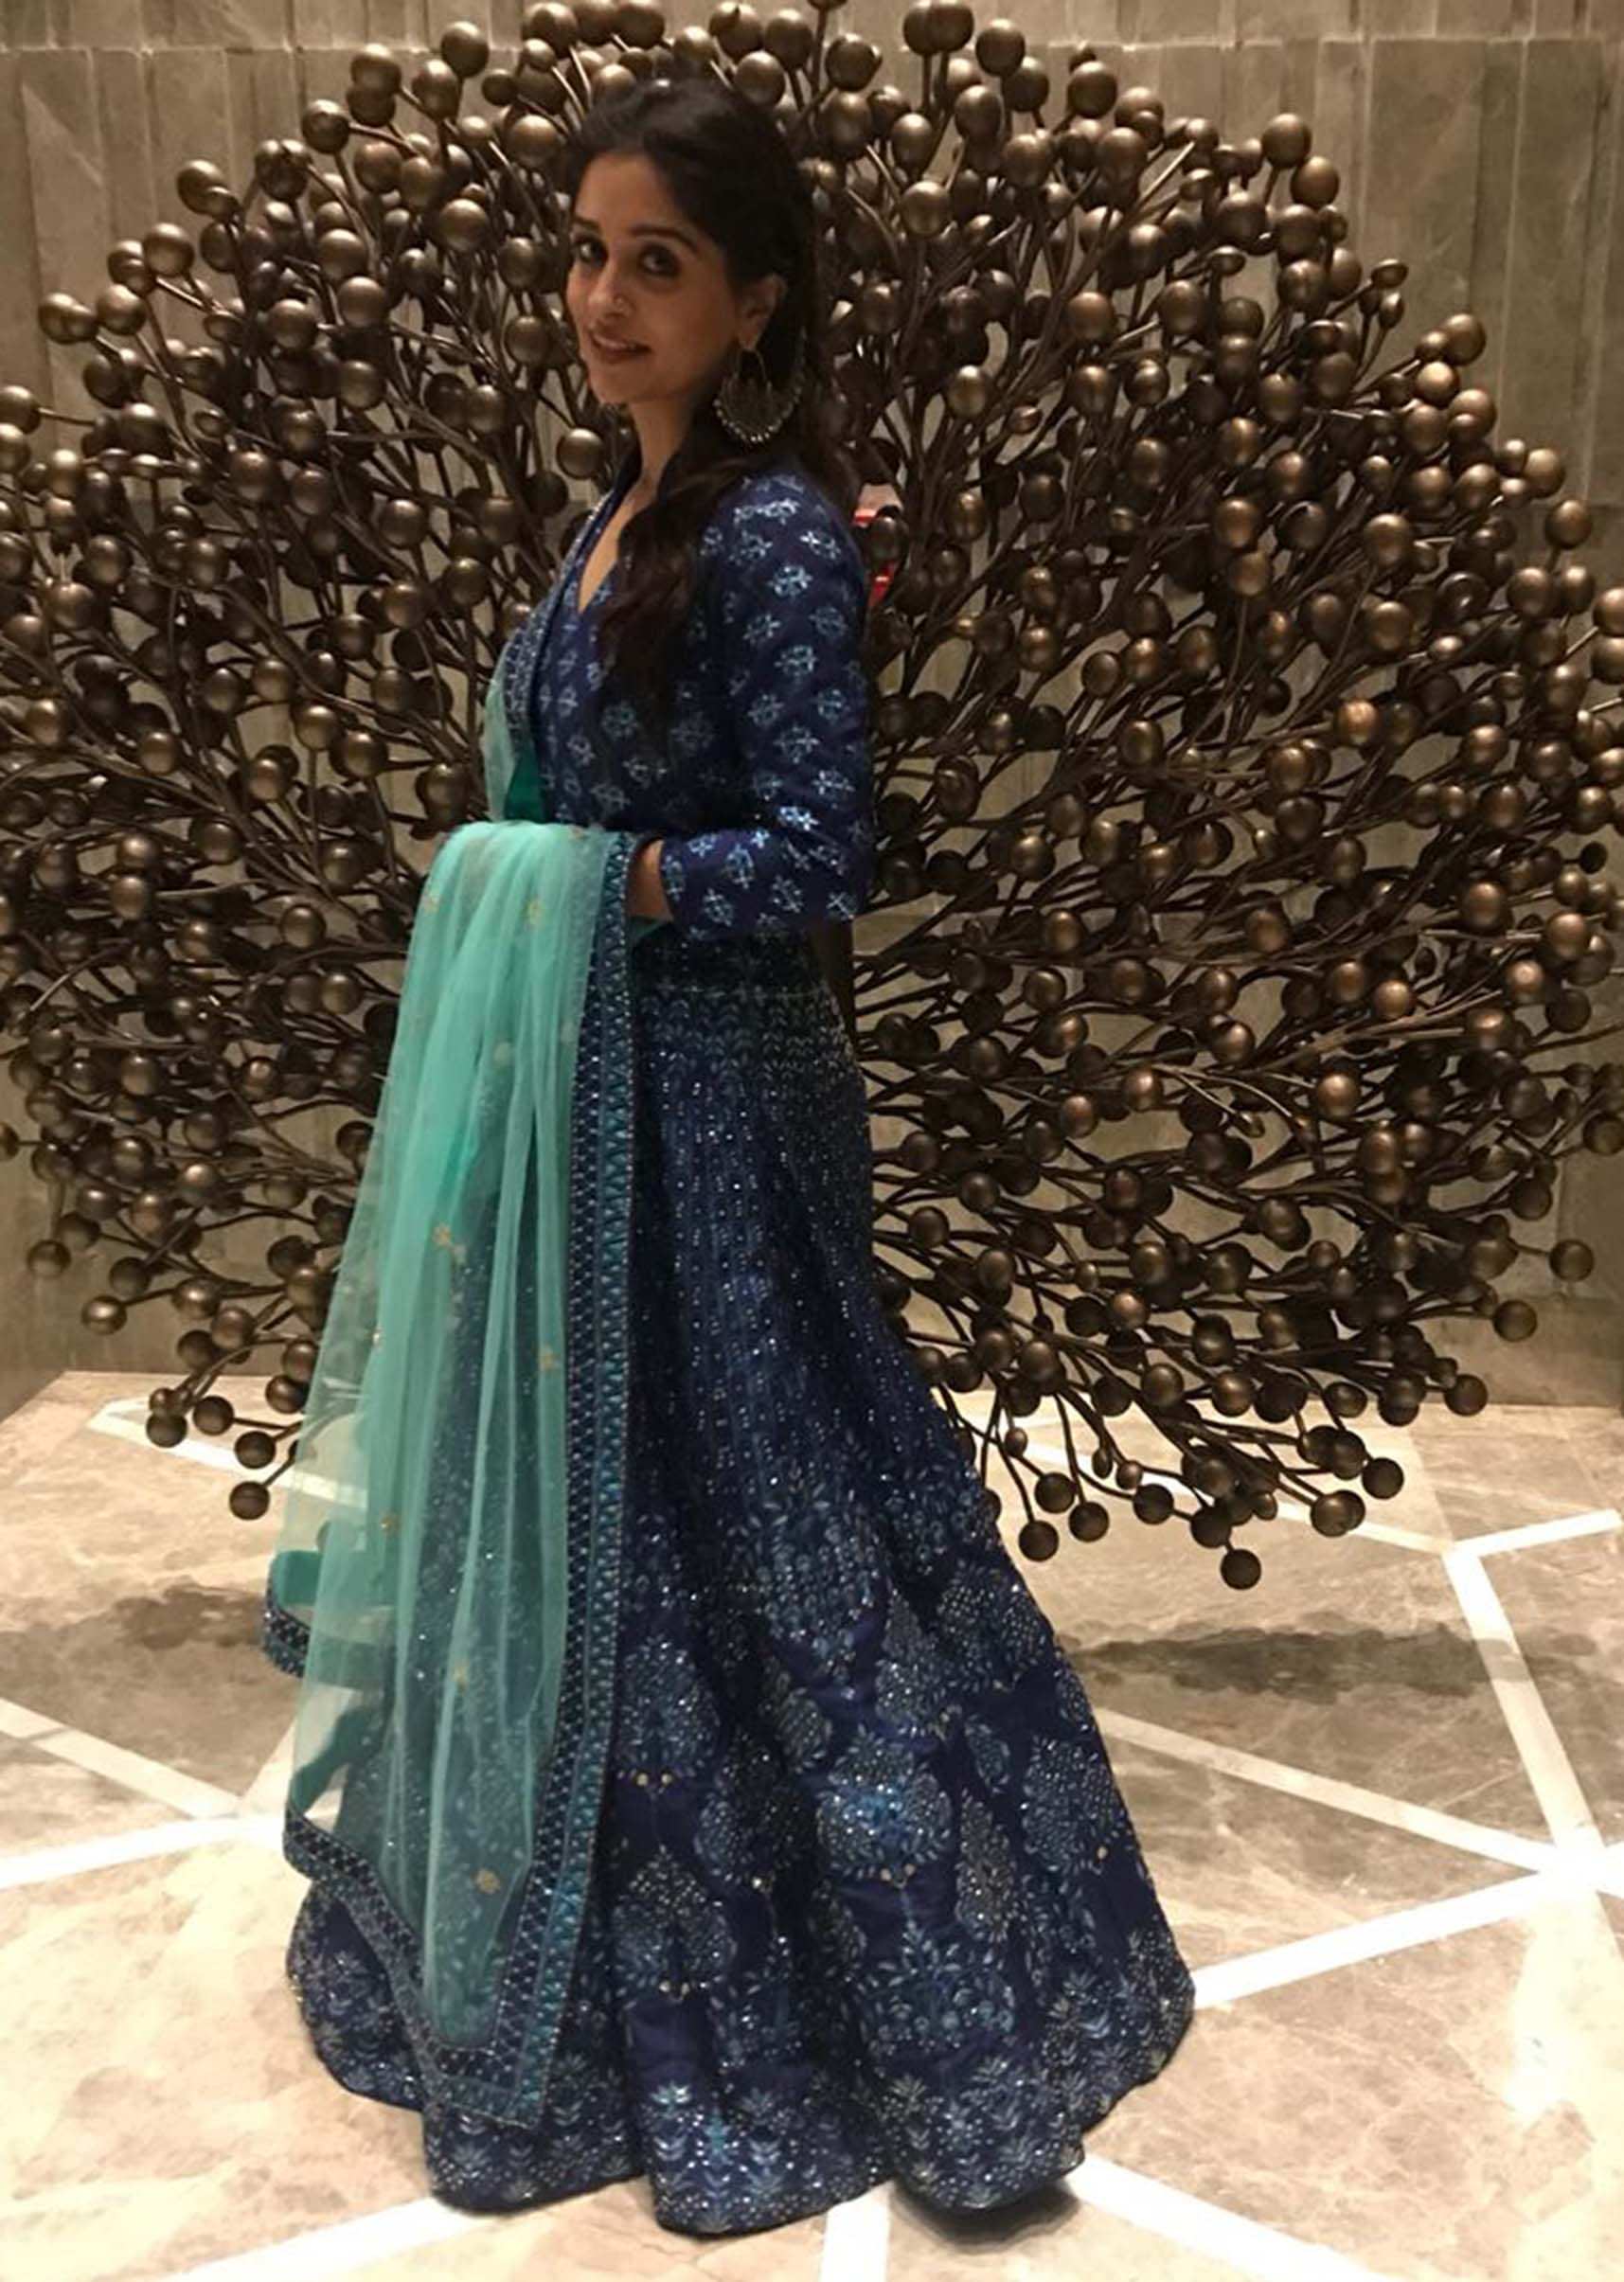 Dipika kakar in Kalki printed Blue Cotton suit a with Sequins and Silk Net Dupatta